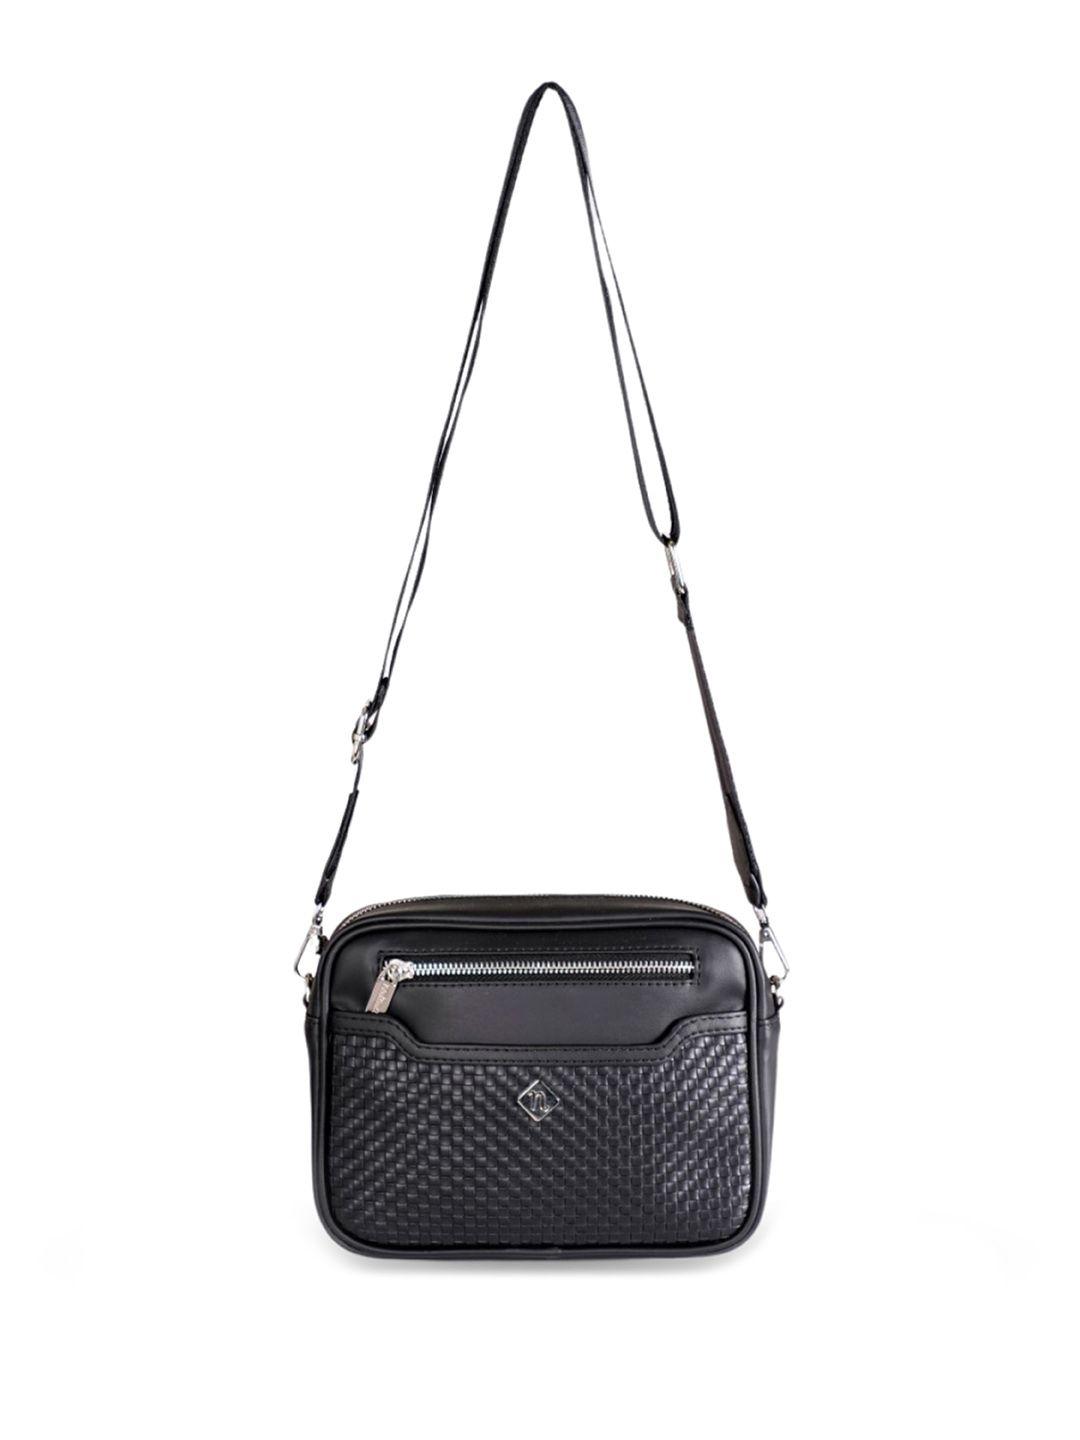 nestasia textured pu structured sling bag with quilted